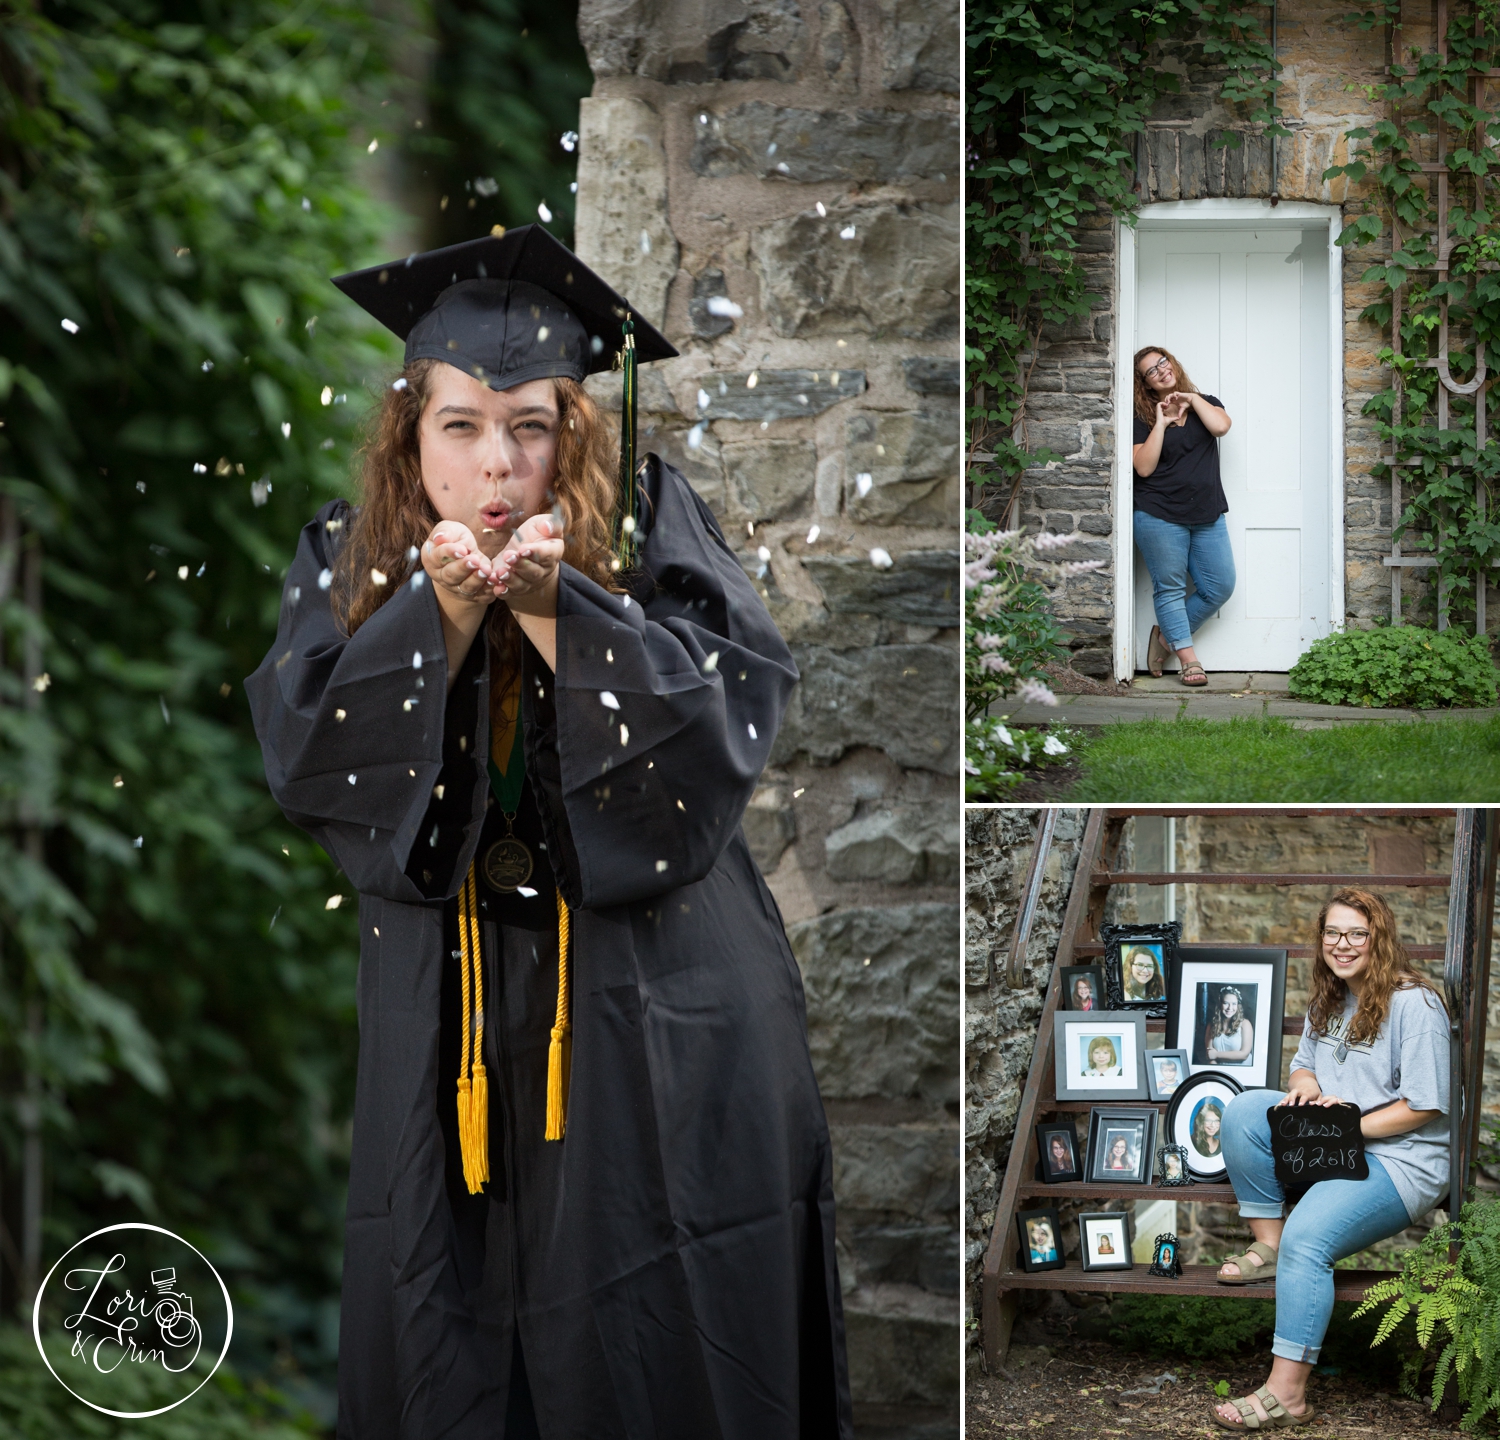 Rush Henrietta Senior Portraits in cap and gown in Highland Park, Rochester, NY